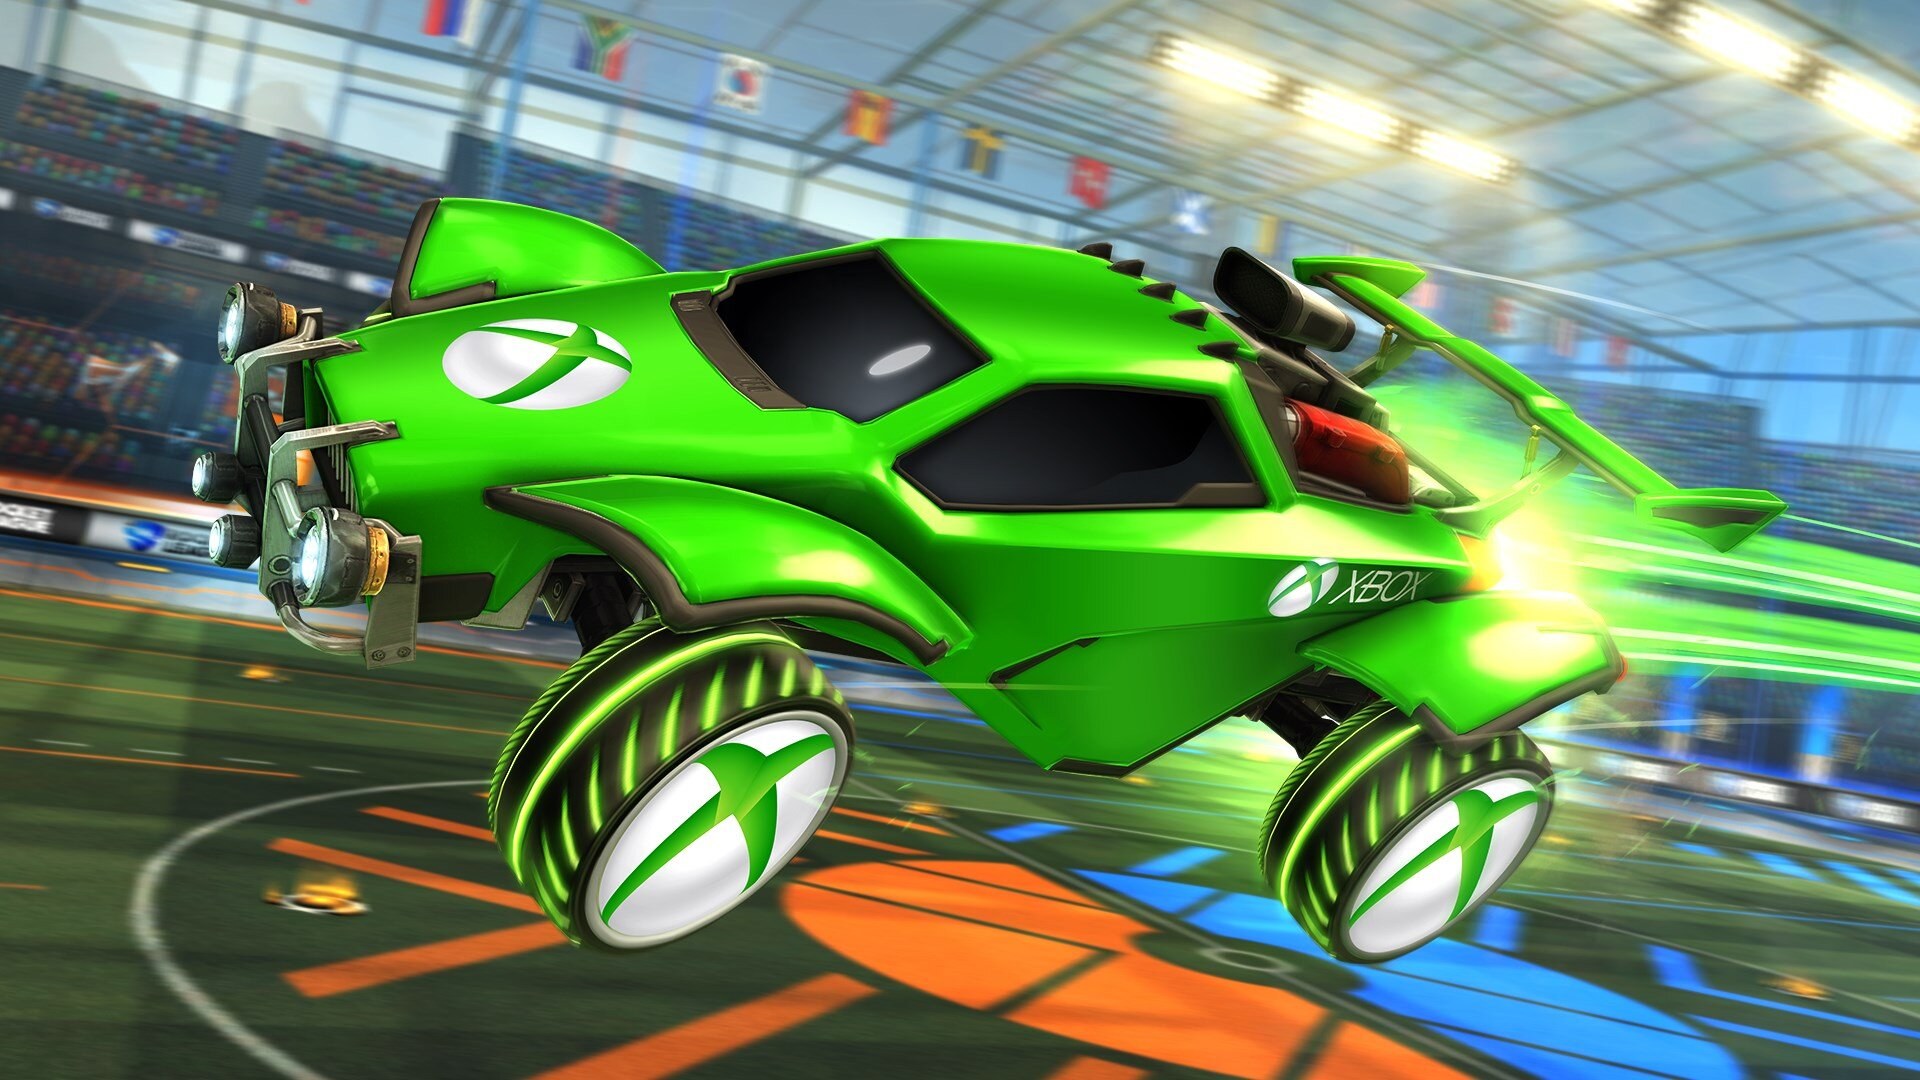 Deskundige Professor een Can You Play Rocket League on Xbox Without Xbox Live?